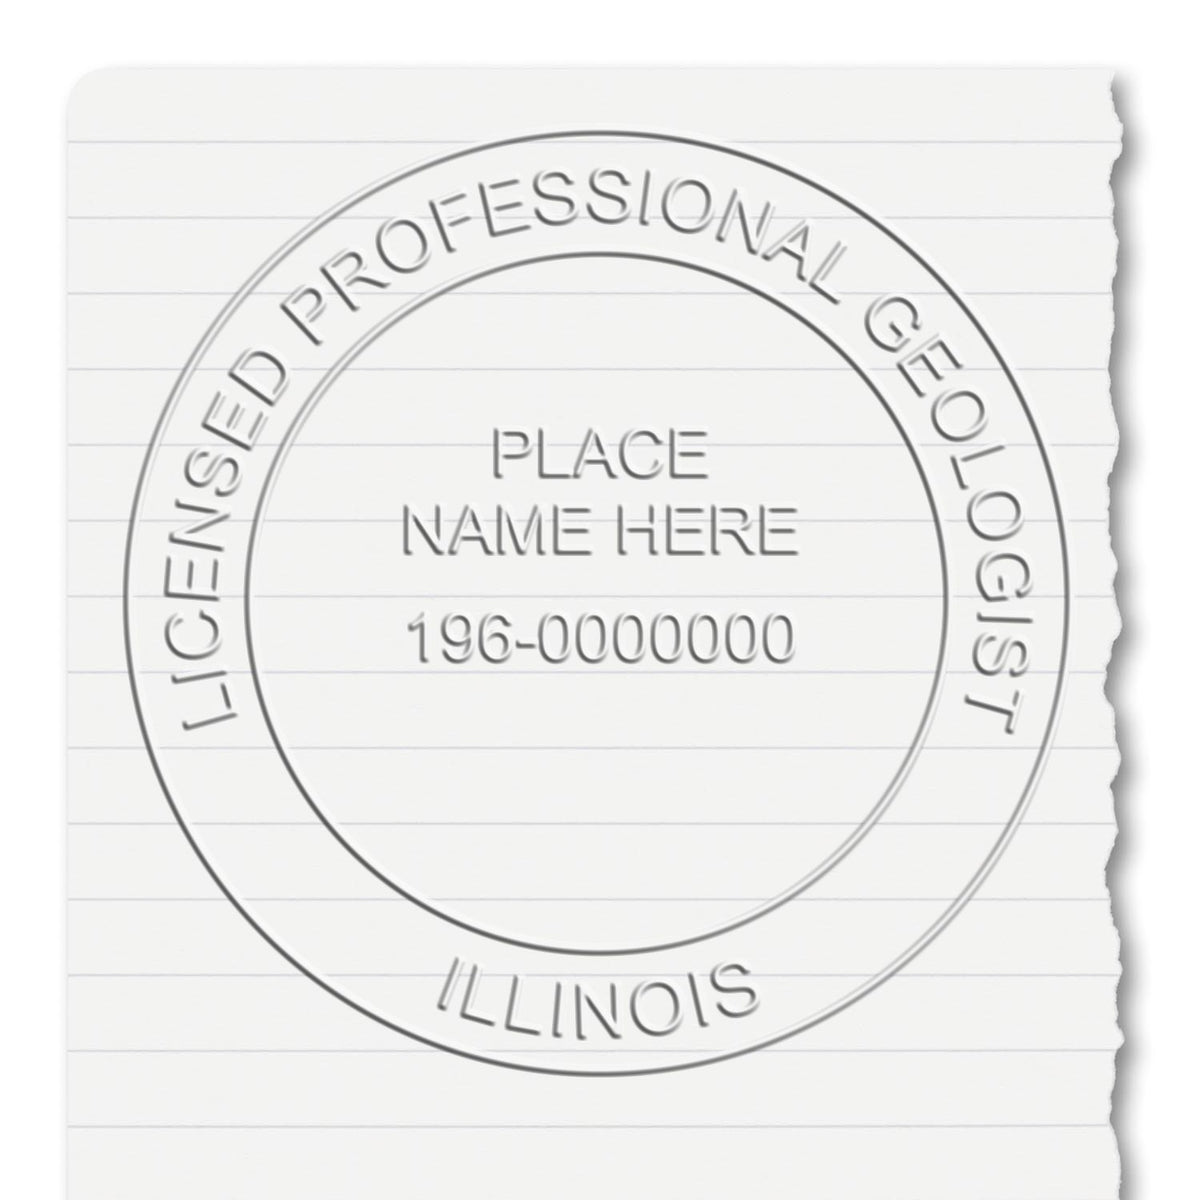 An in use photo of the Long Reach Illinois Geology Seal showing a sample imprint on a cardstock